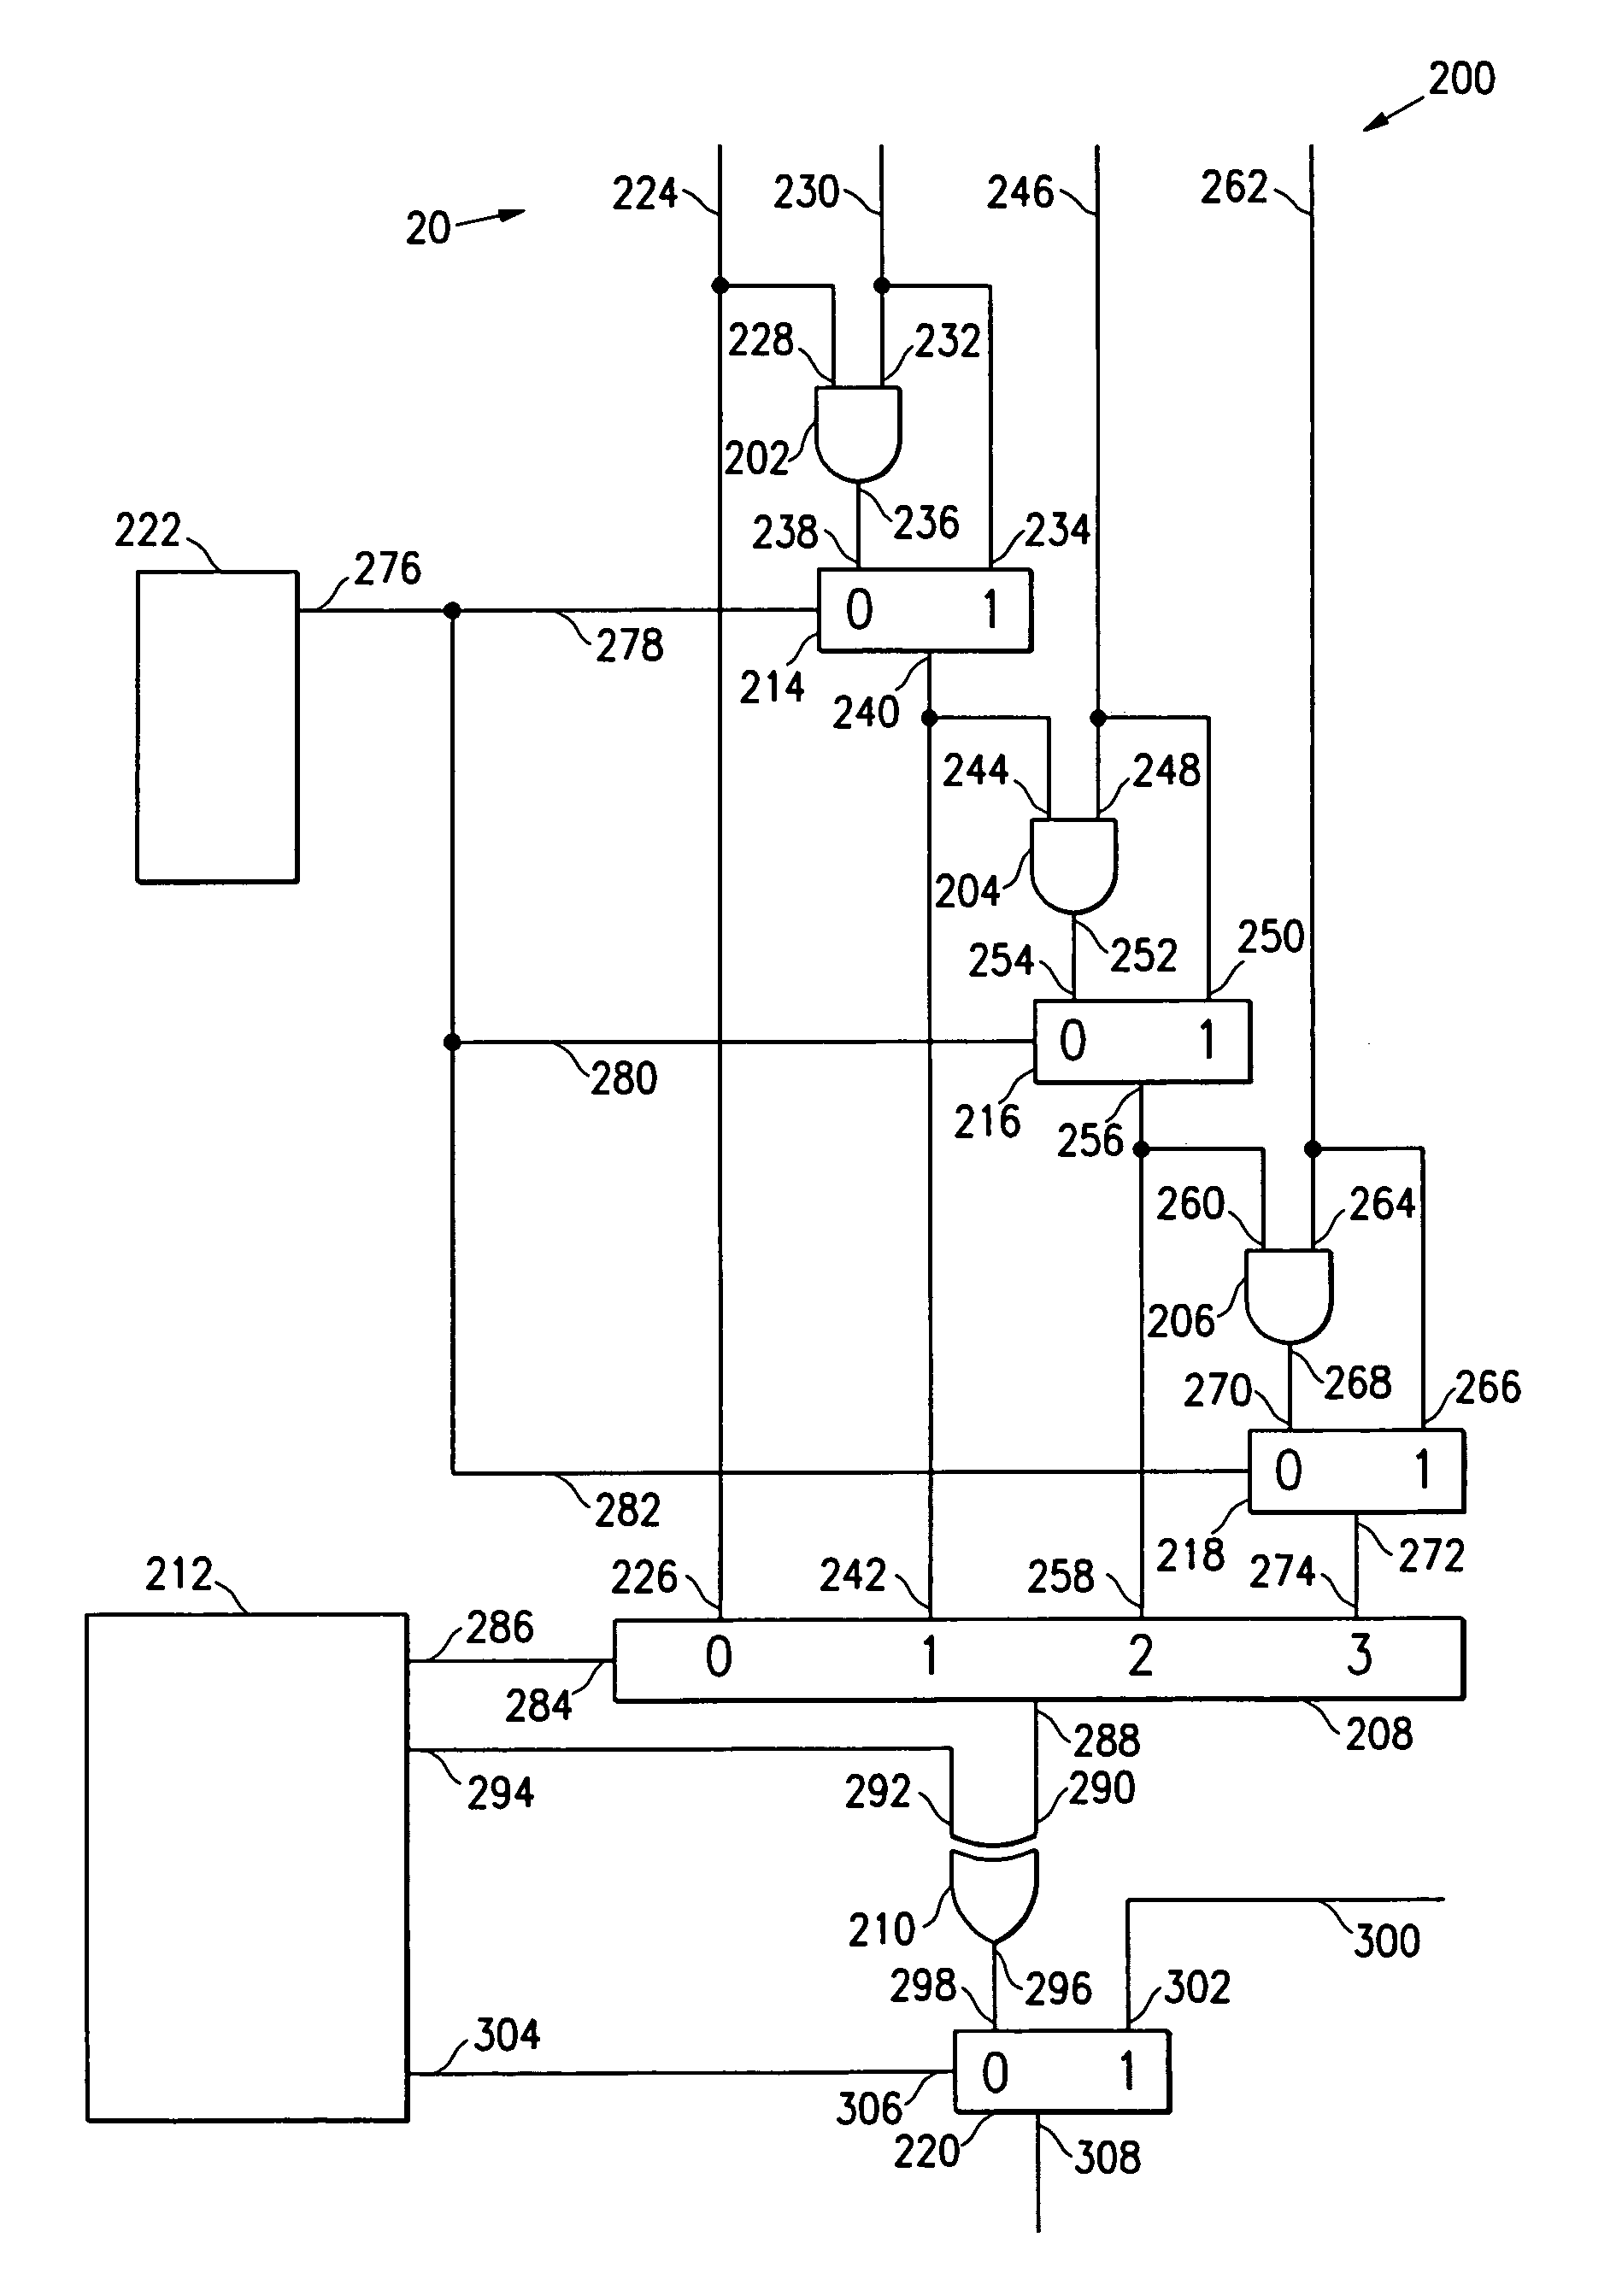 Circuit apparatus and method for testing integrated circuits using weighted pseudo-random test patterns